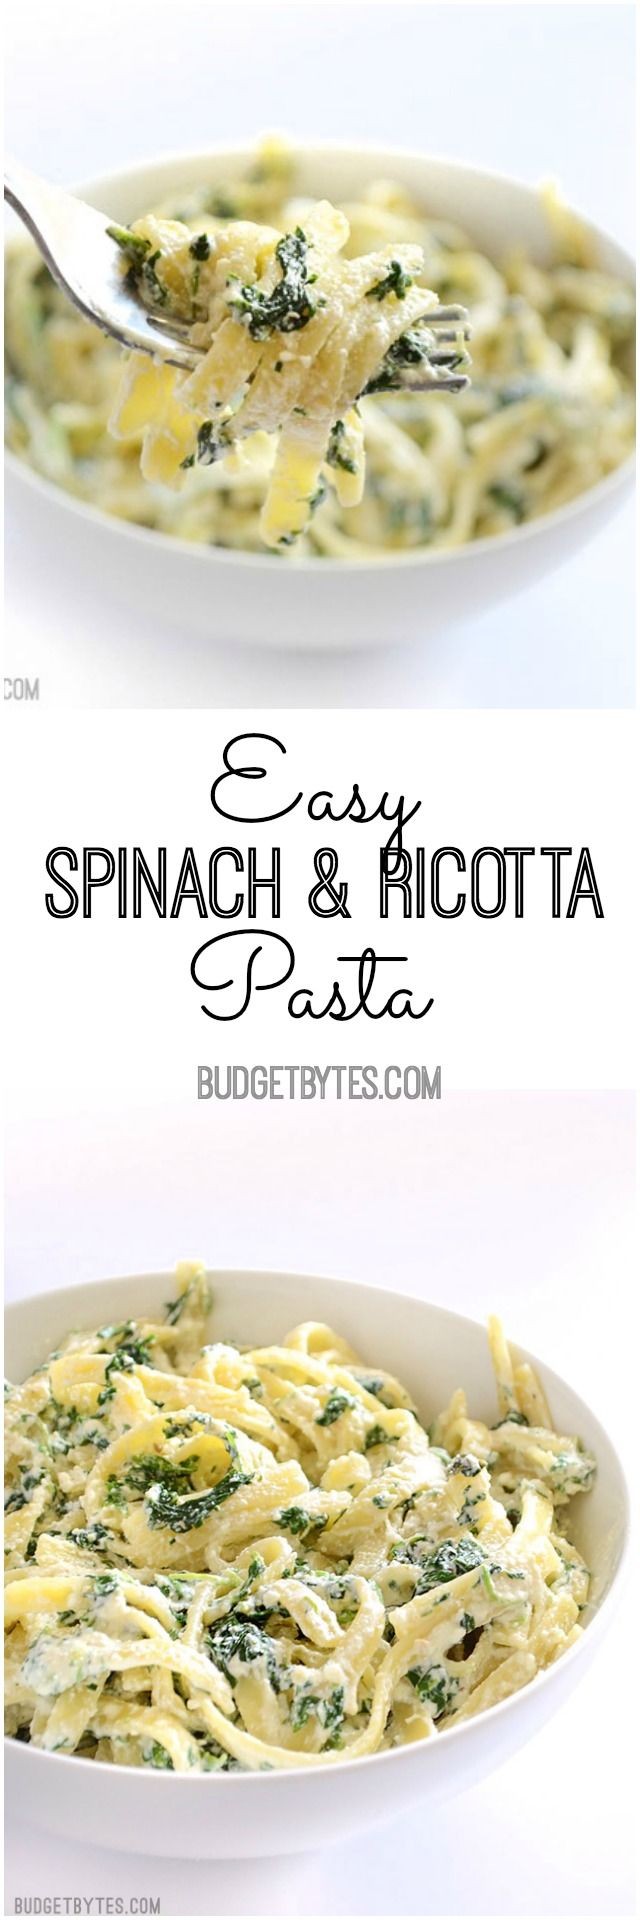 An easy weeknight pasta that takes minutes to make...